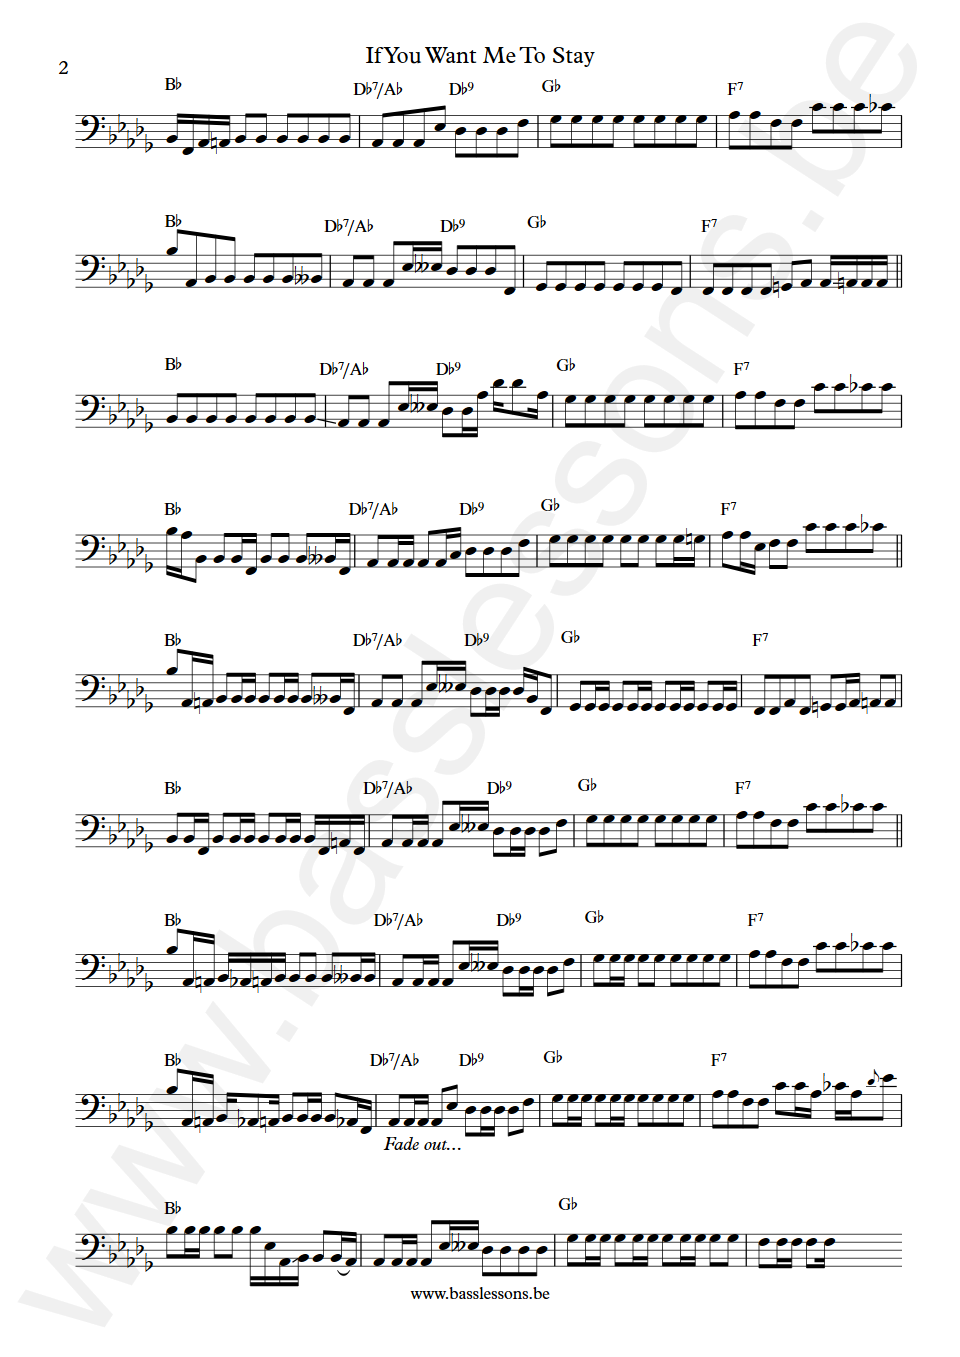 Sly & The Family Stone If You Want Me To Stay Rusty Allen Bass Transcription version 2 part 2